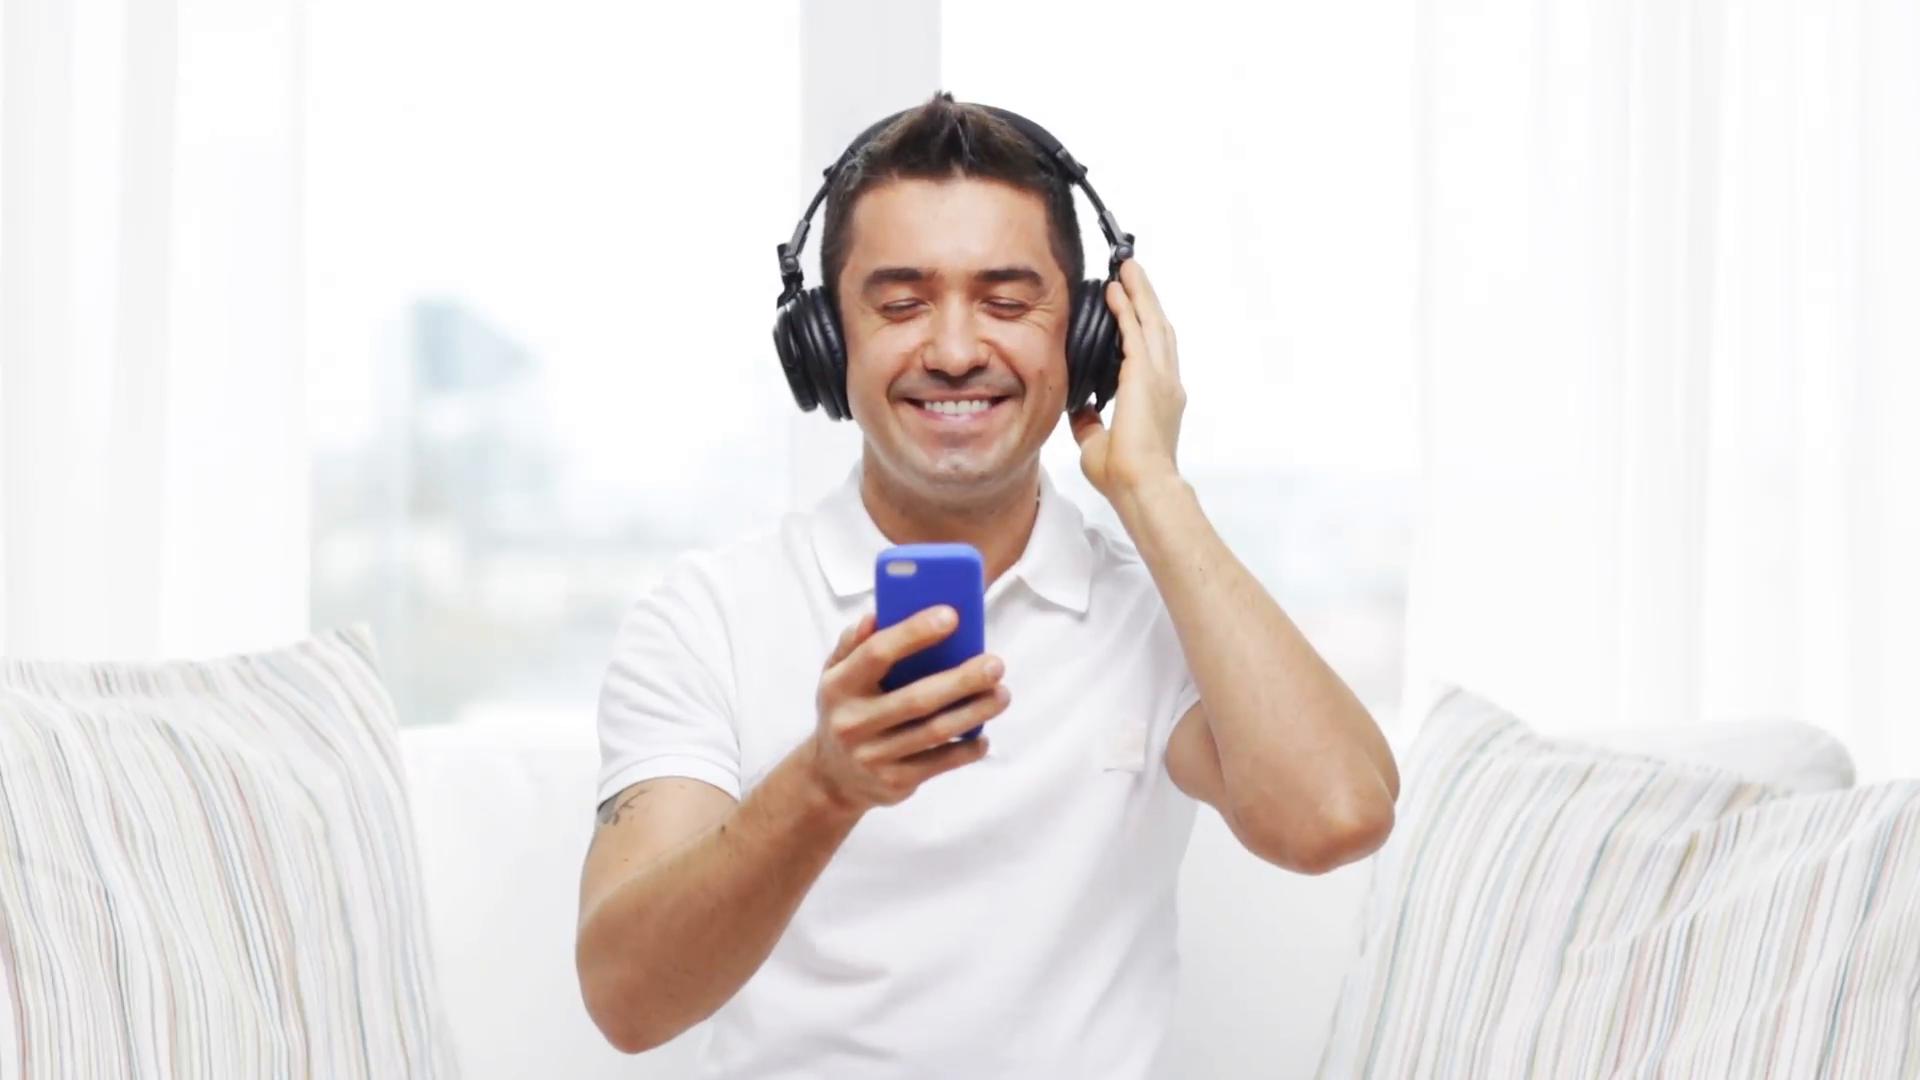 technology-people-lifestyle-and-distance-learning-concept-happy-man-with-smartphone-and-headphones-listening-to-music-at-home_eu29zj2he__F0000.jpg